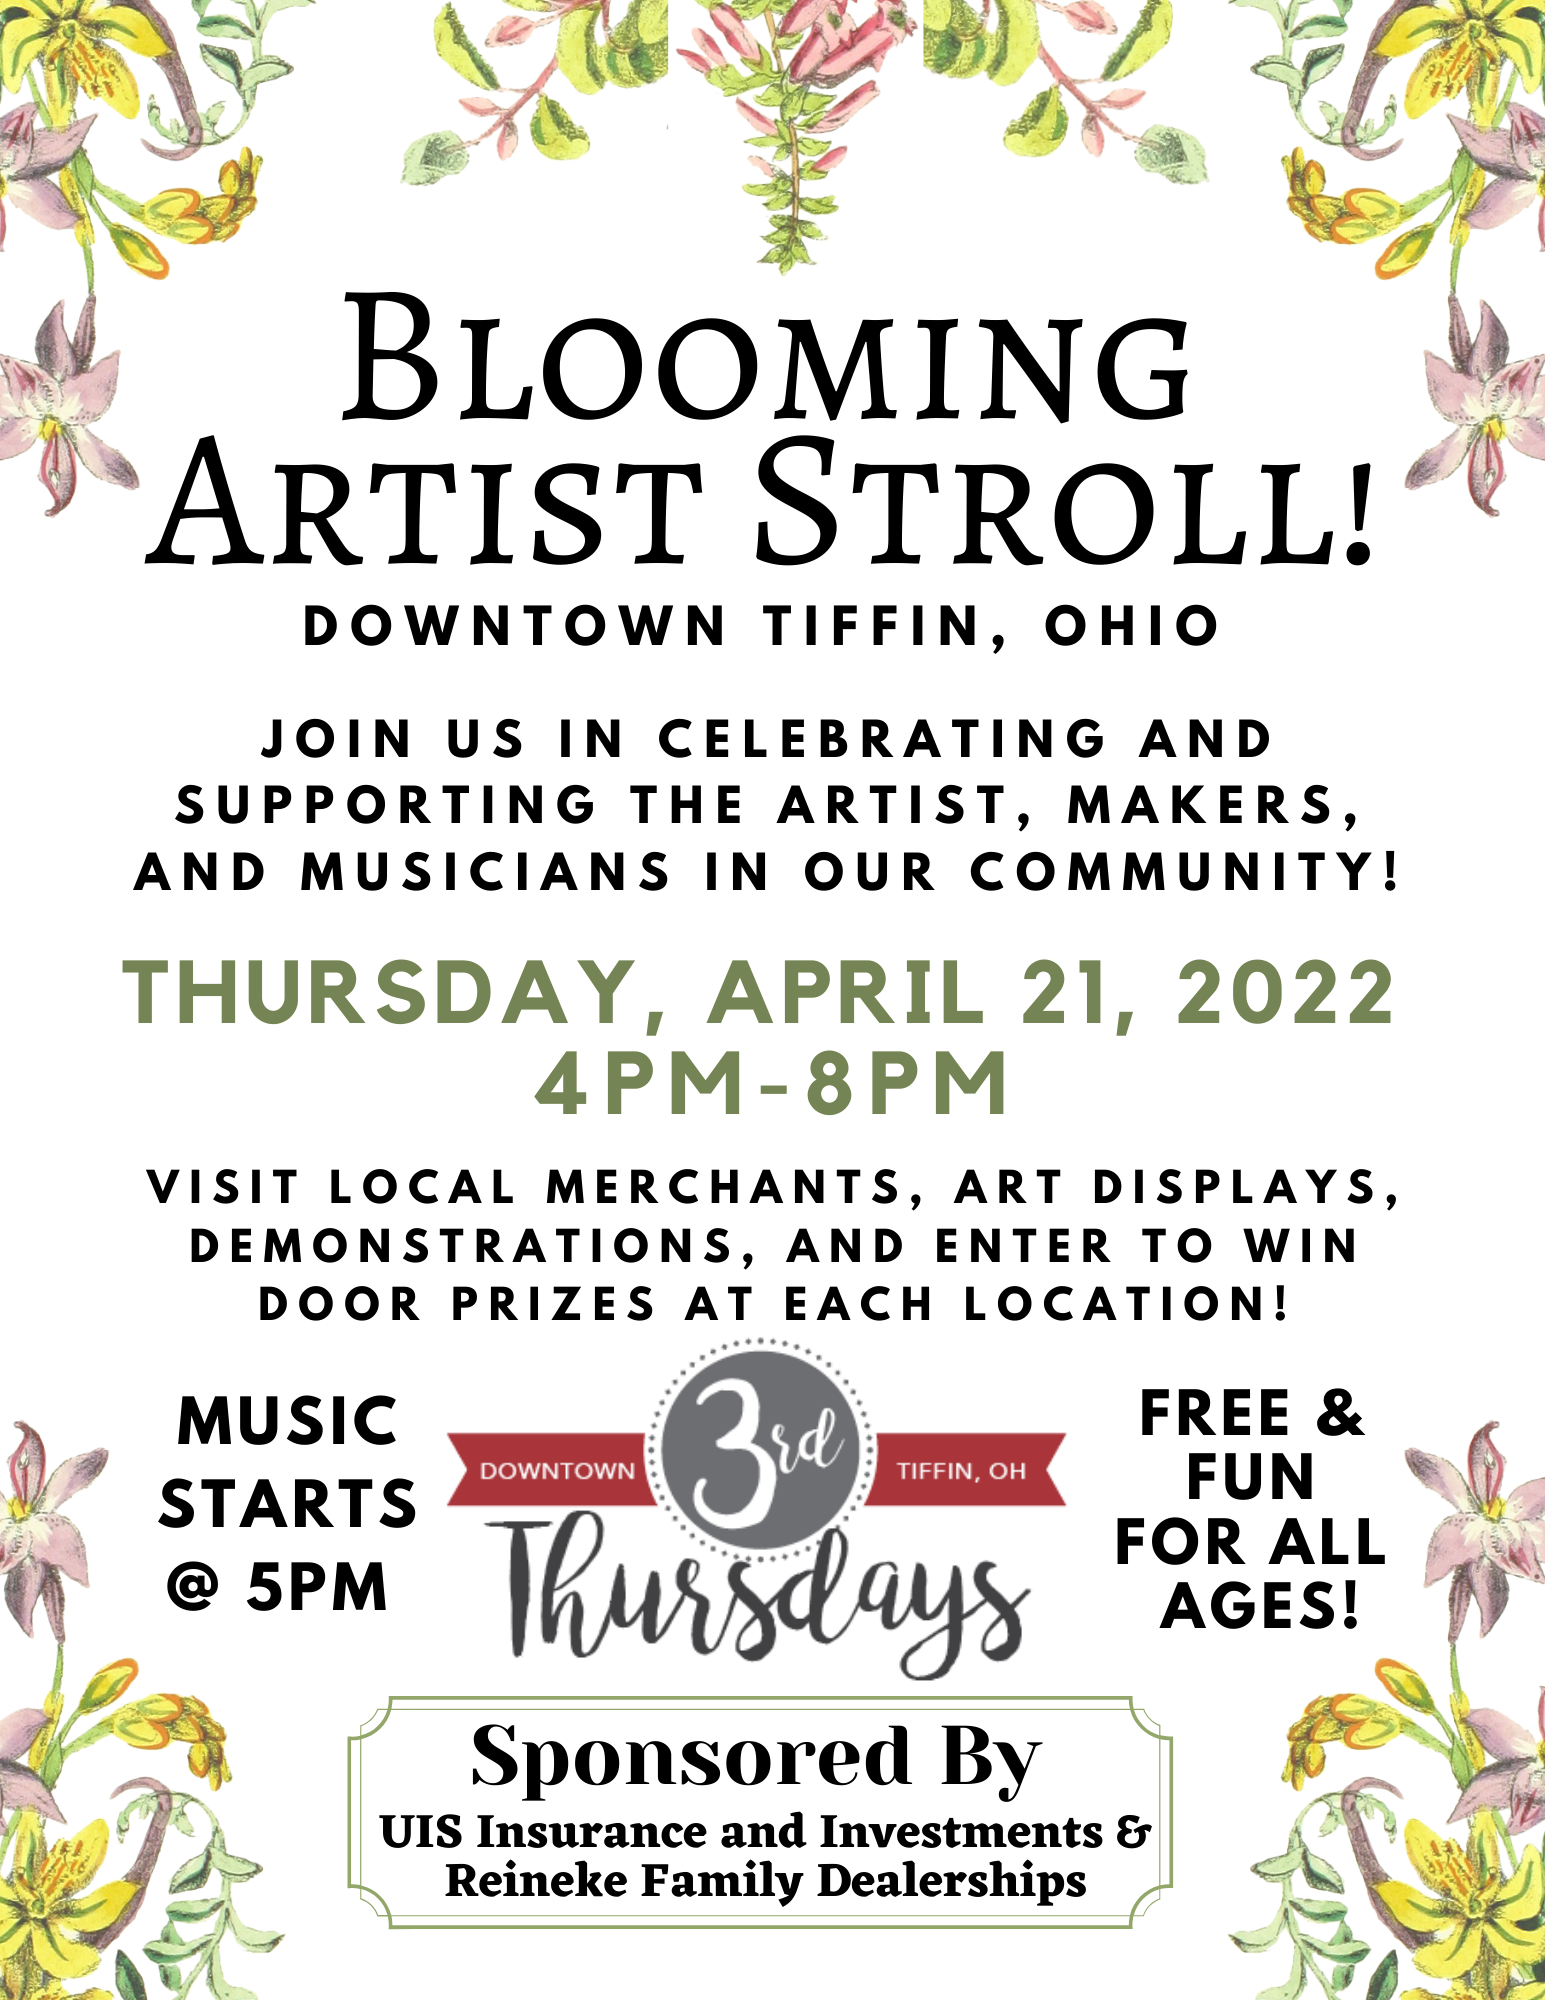 Downtown Tiffin 3rd Thursday: Blooming Artist Stroll